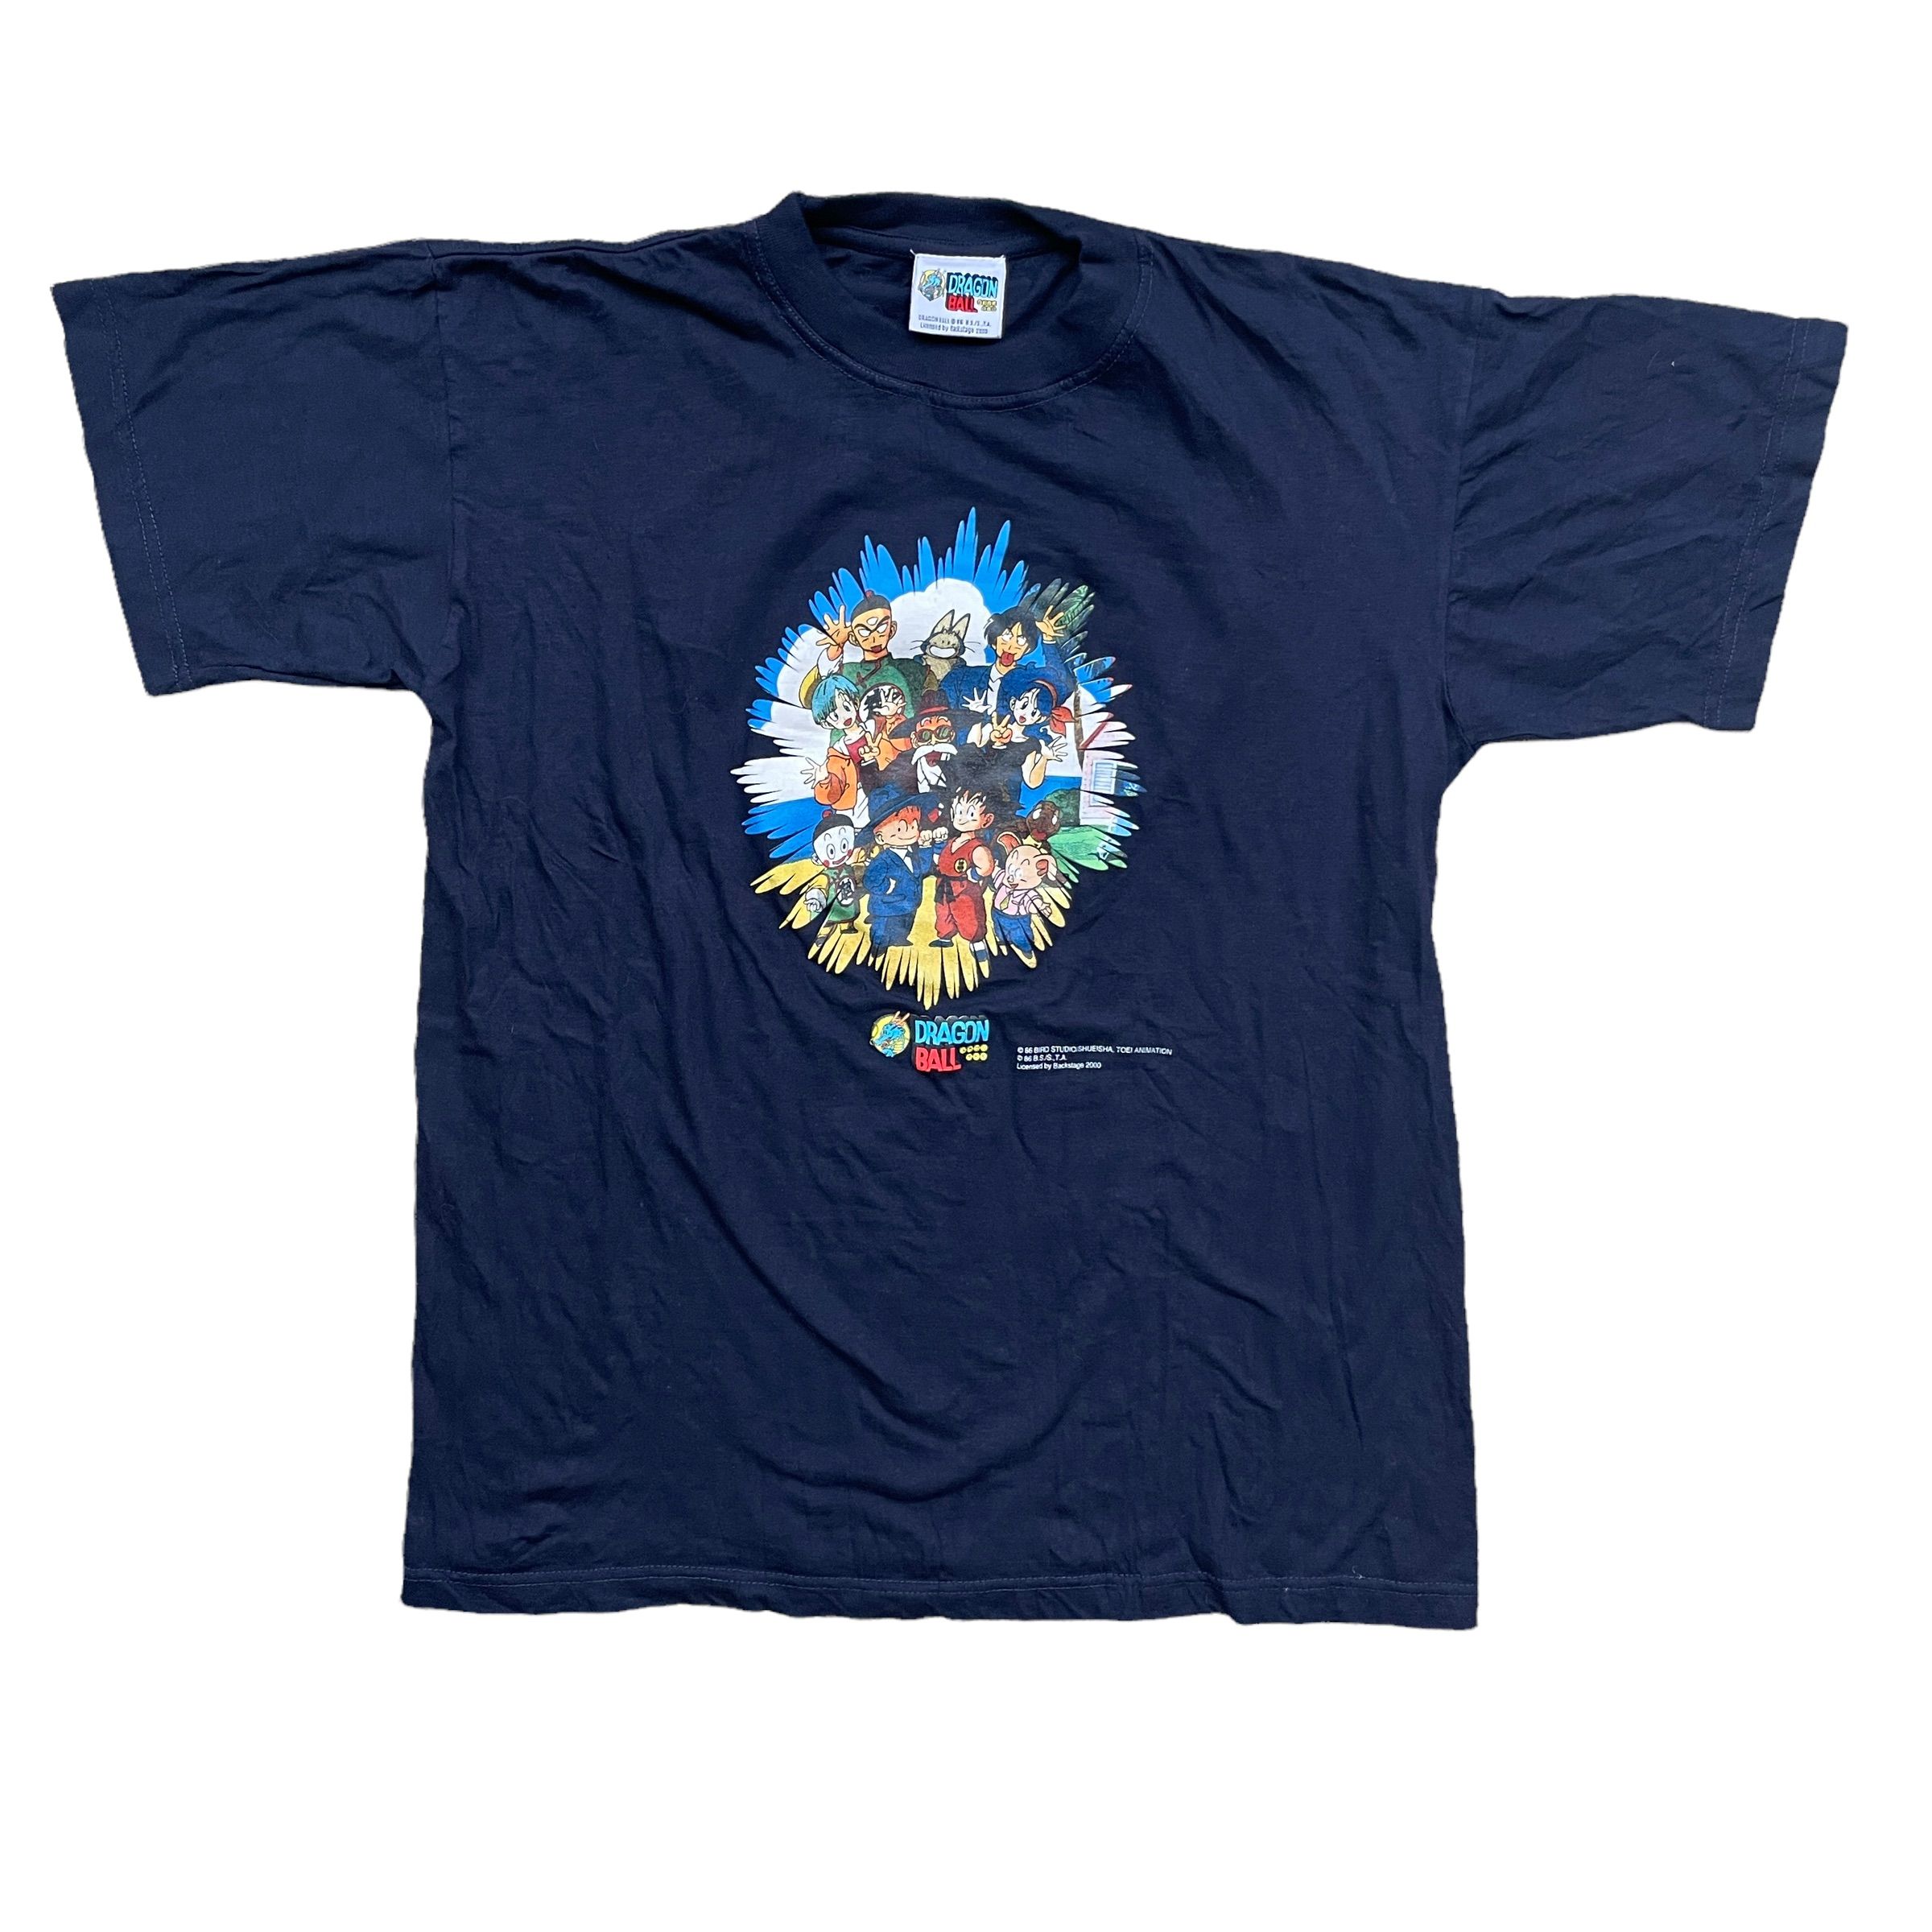 Pre-owned Vintage 2000 Dragon Ball Z T-shirt In Navy